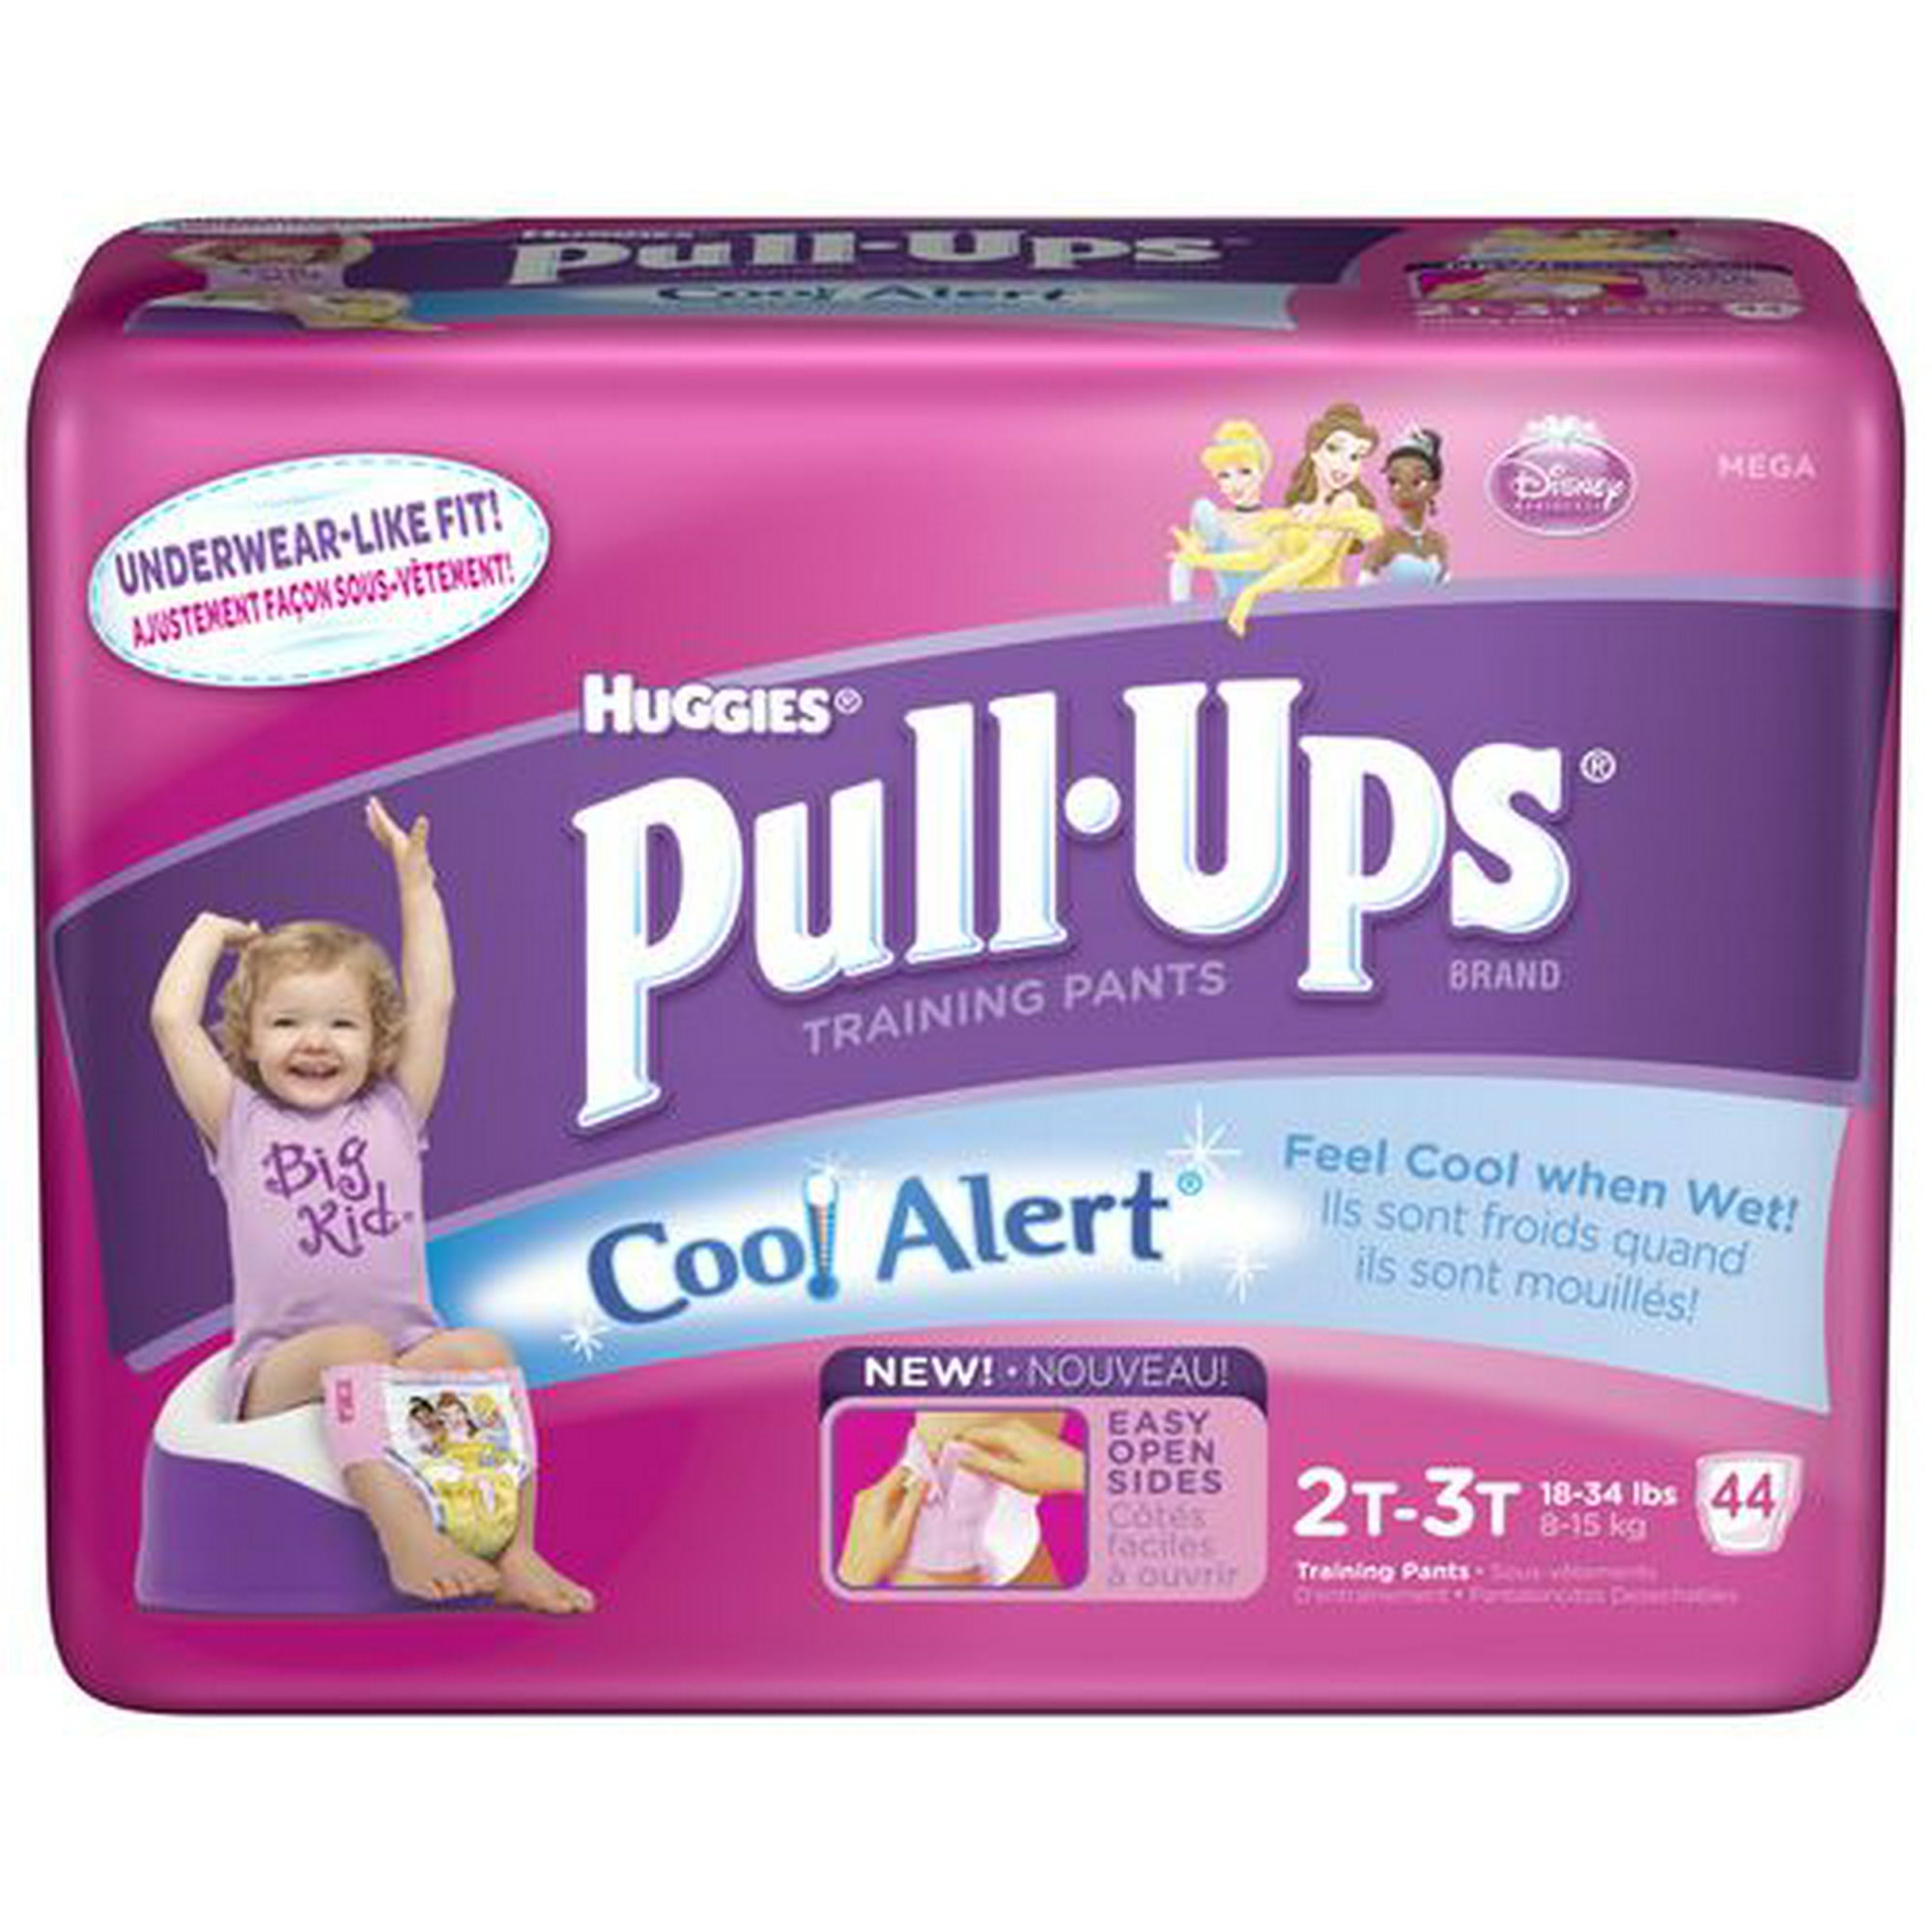 Huggies Pull-up Training Pants for Boys (Size L, 3T - 4T, 116 Count)